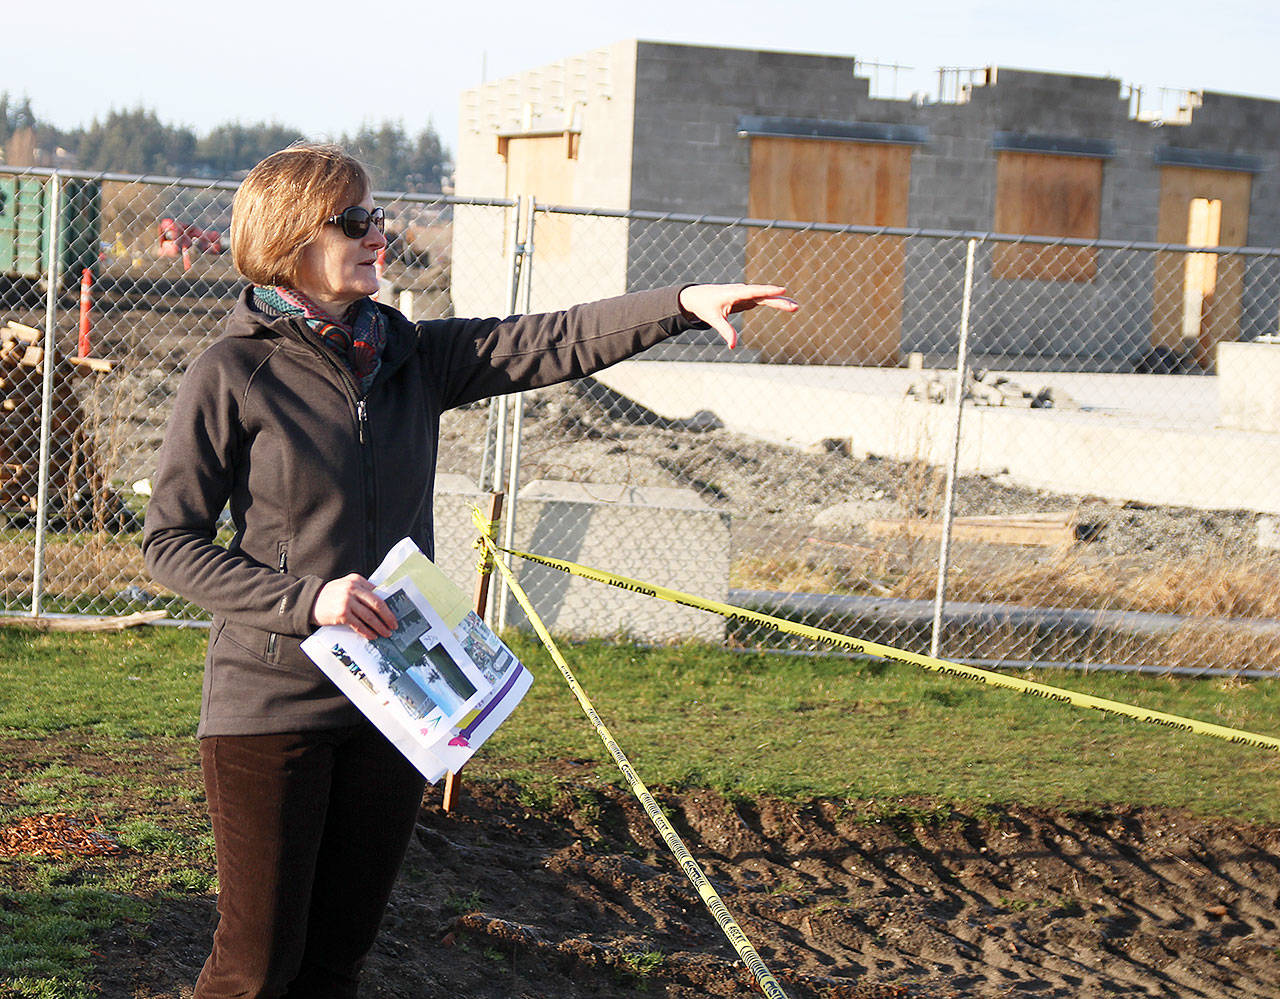 Ellen White, a fundraising chairwoman for the Bailey Johnson Playground Improvement Committee, explains the new planned layout for the updated playground commemorating a 4-year-old Oak Harbor girl who died in 2002. The toddler play area will open with the re-opening of Windjammer Park in July. Photo by Laura Guido/Whidbey News-Times